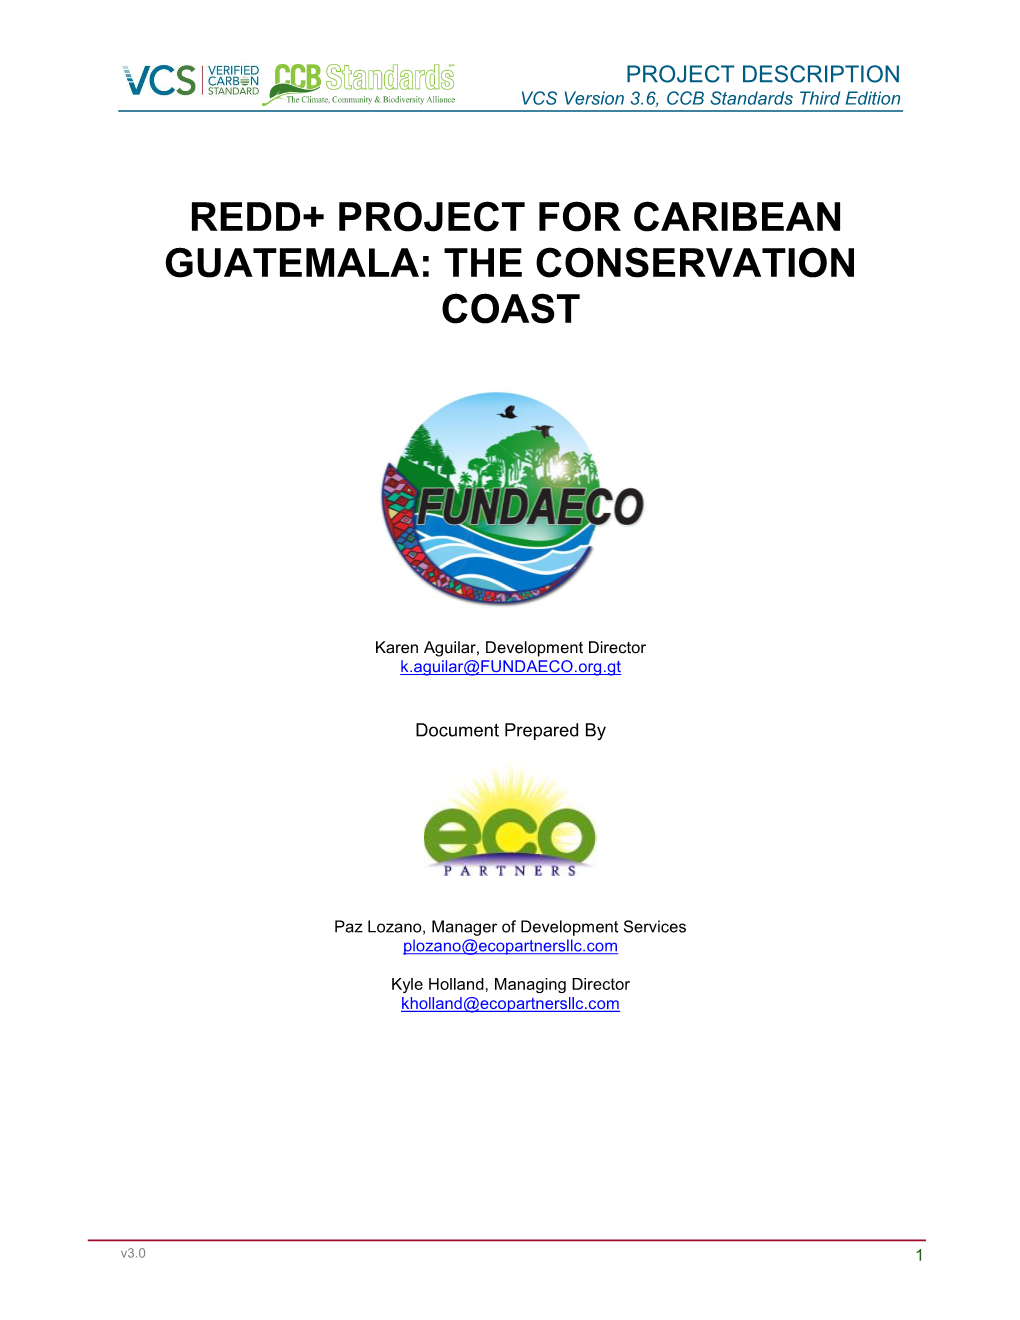 REDD+ PROJECT for CARIBBEAN GUATEMALA: the CONSERVATION COAST Project Location Department of Izabal, Guatemala